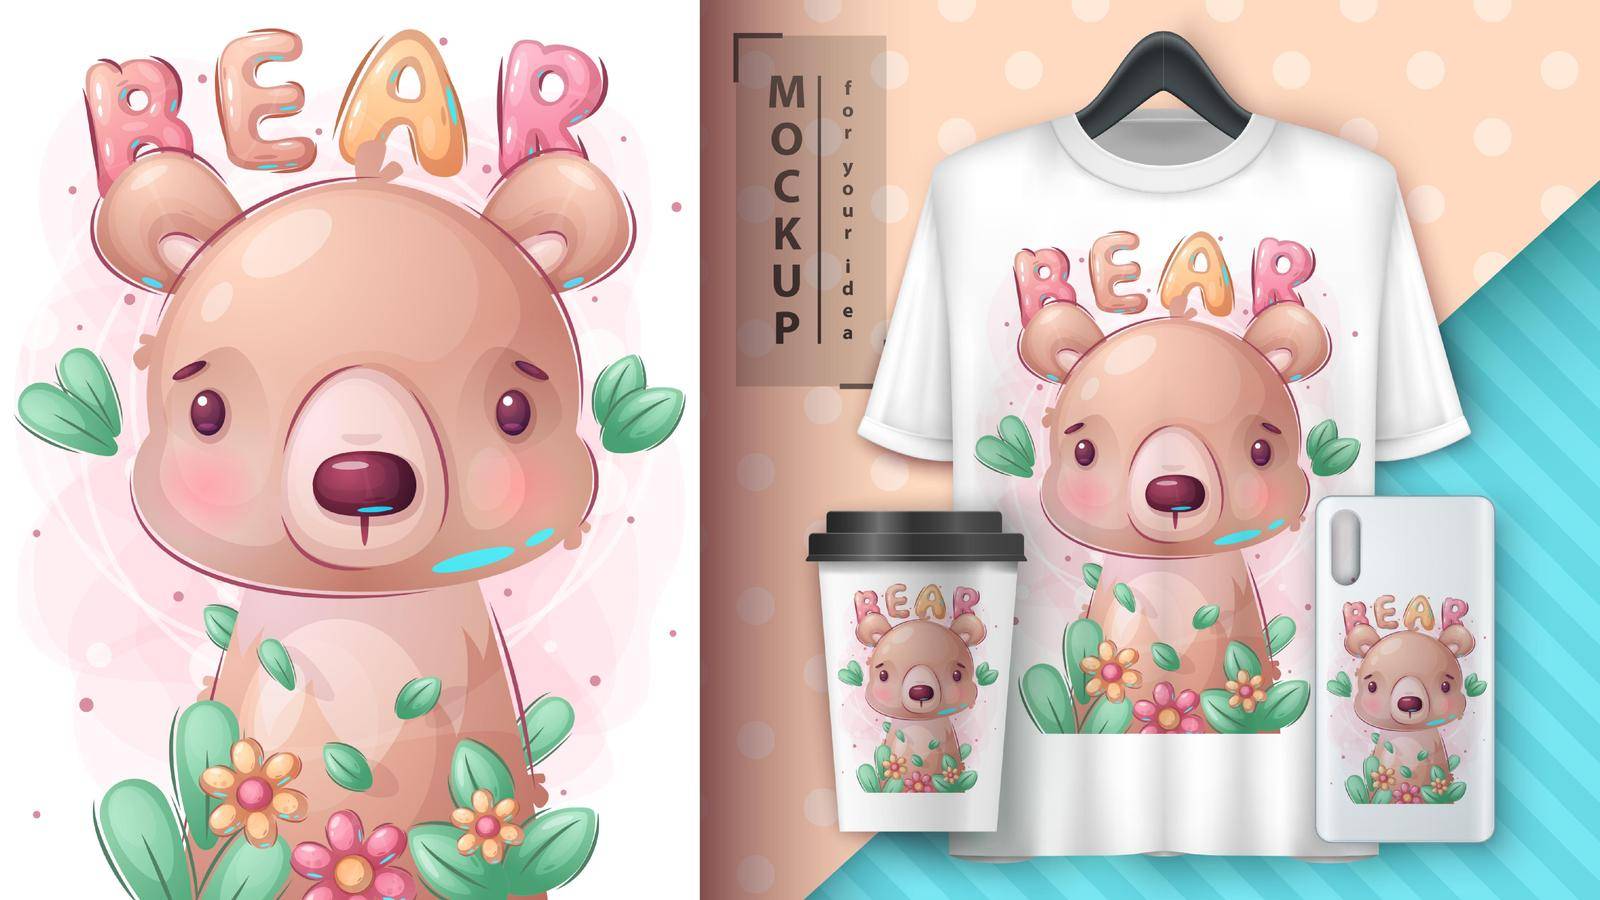 Bear in flower poster and merchandising by rwgusev